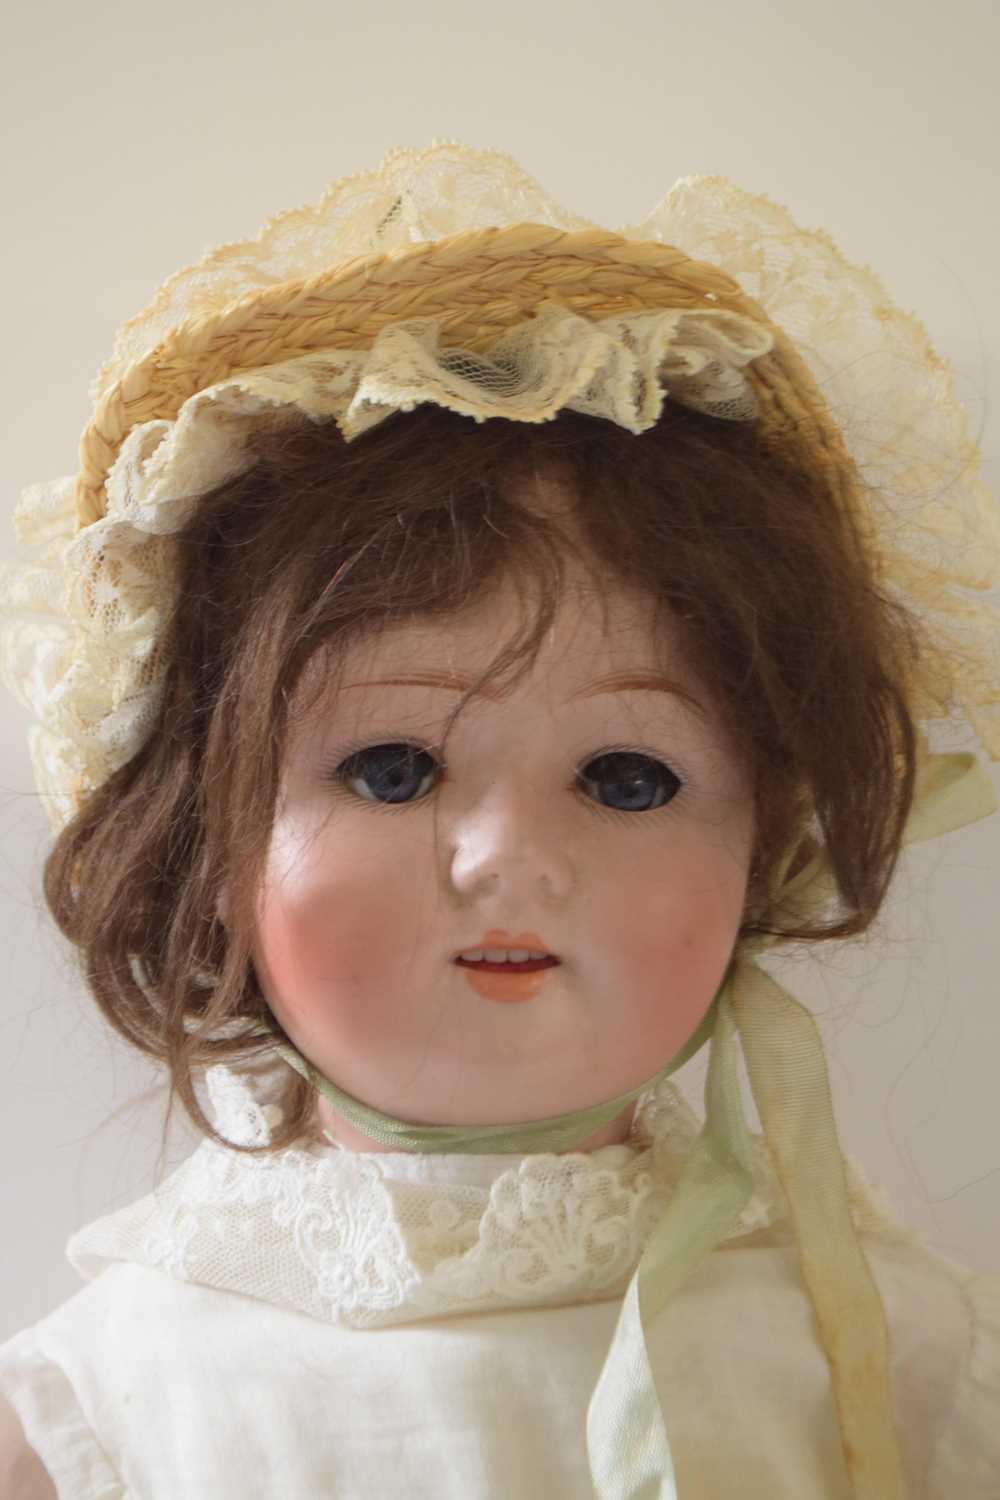 Bisque headed doll by William Goebel, marked 120, in original clothing - Image 2 of 3